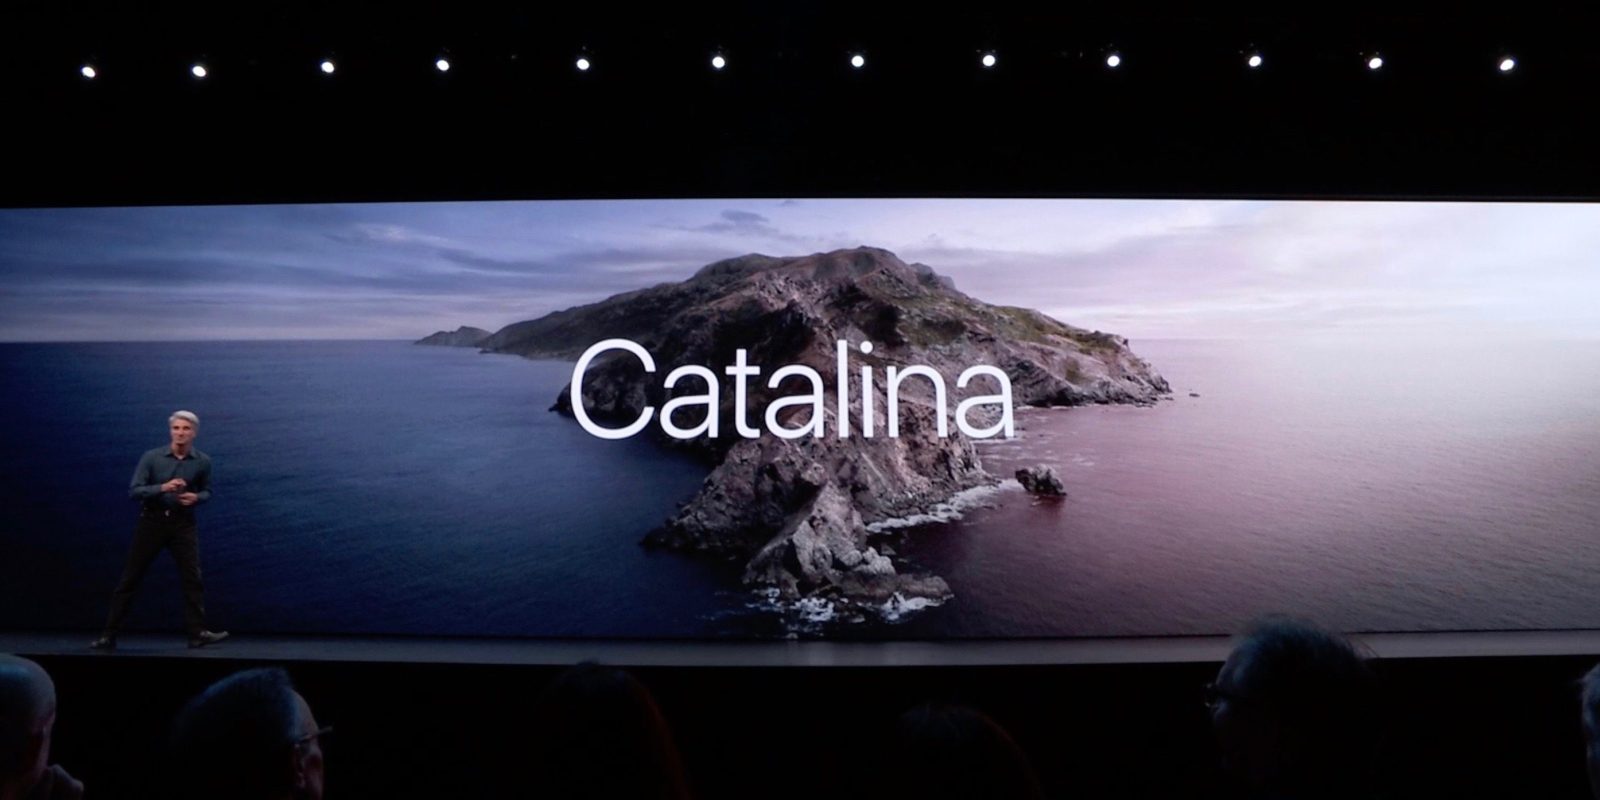 How to get ready for macOS Catalina